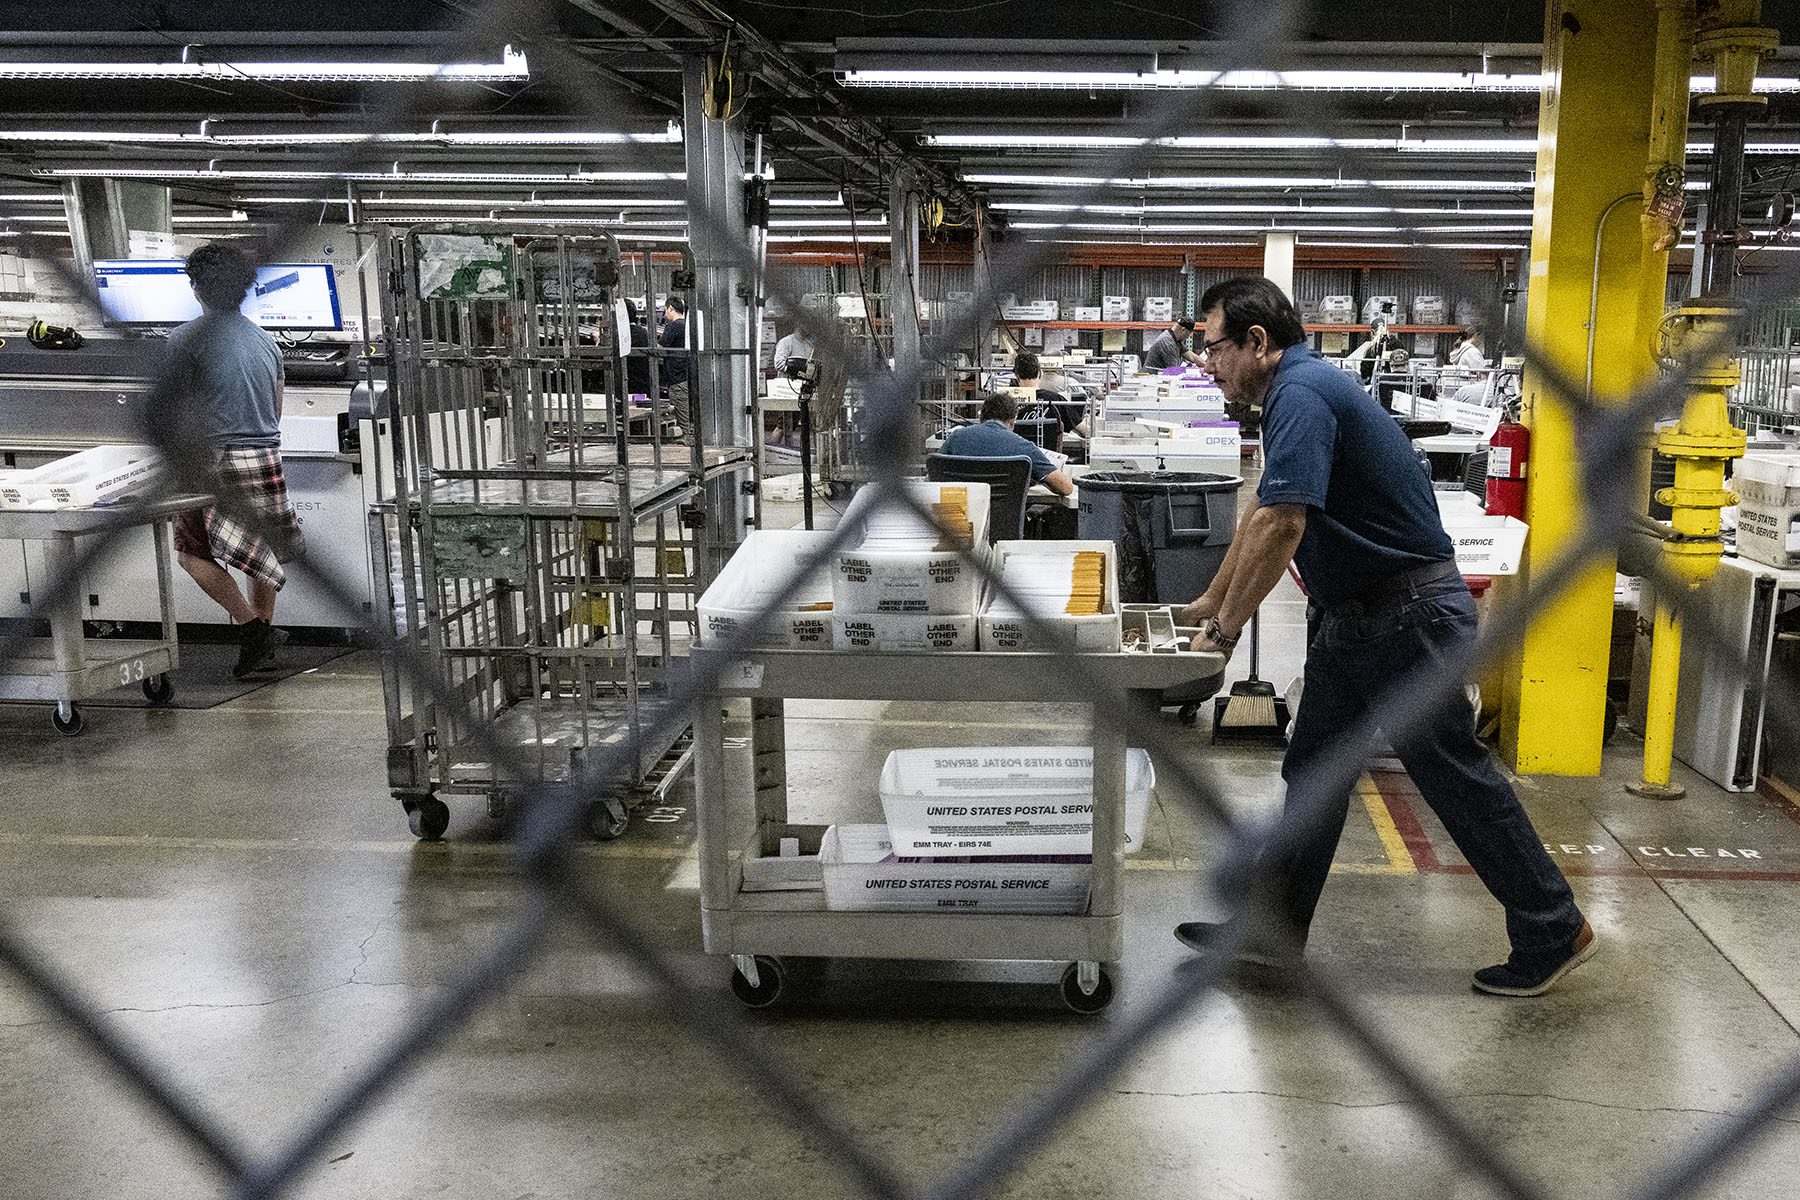 Employees at the Orange County Registrar of Voters extract and sort ballots in a secure area in Santa Ana, California.